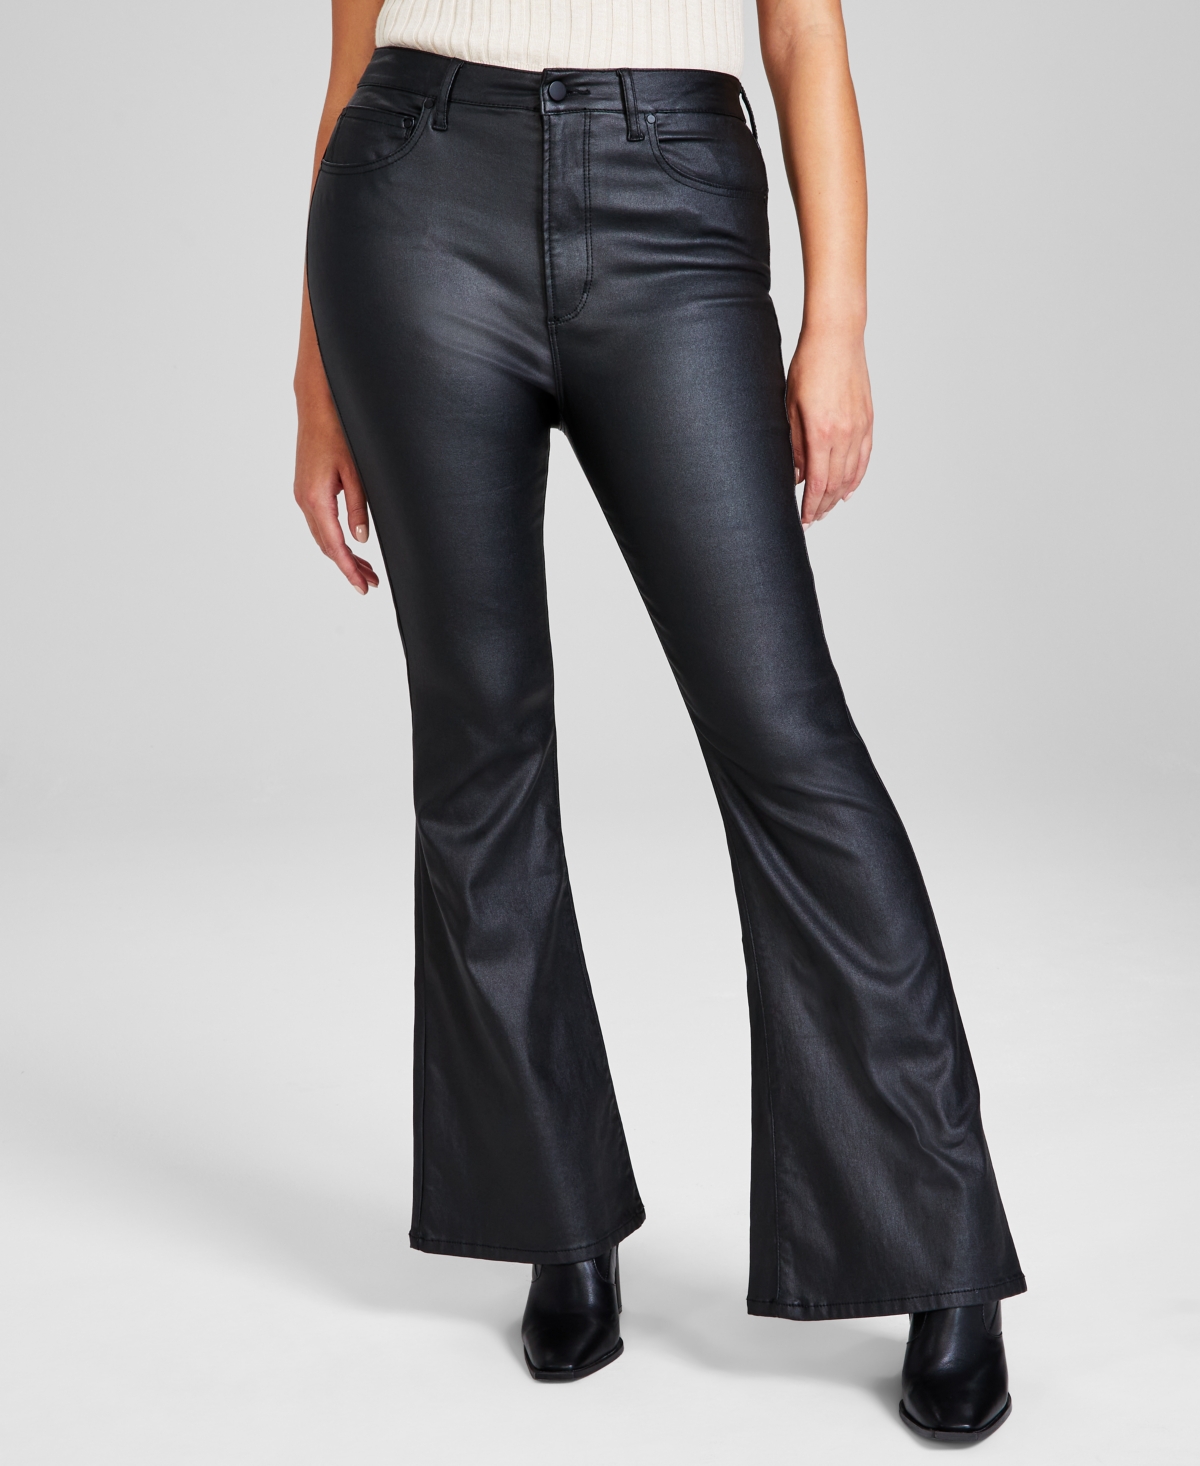 Women's High Rise Coated Flare Jeans, Created for Macy's - Black